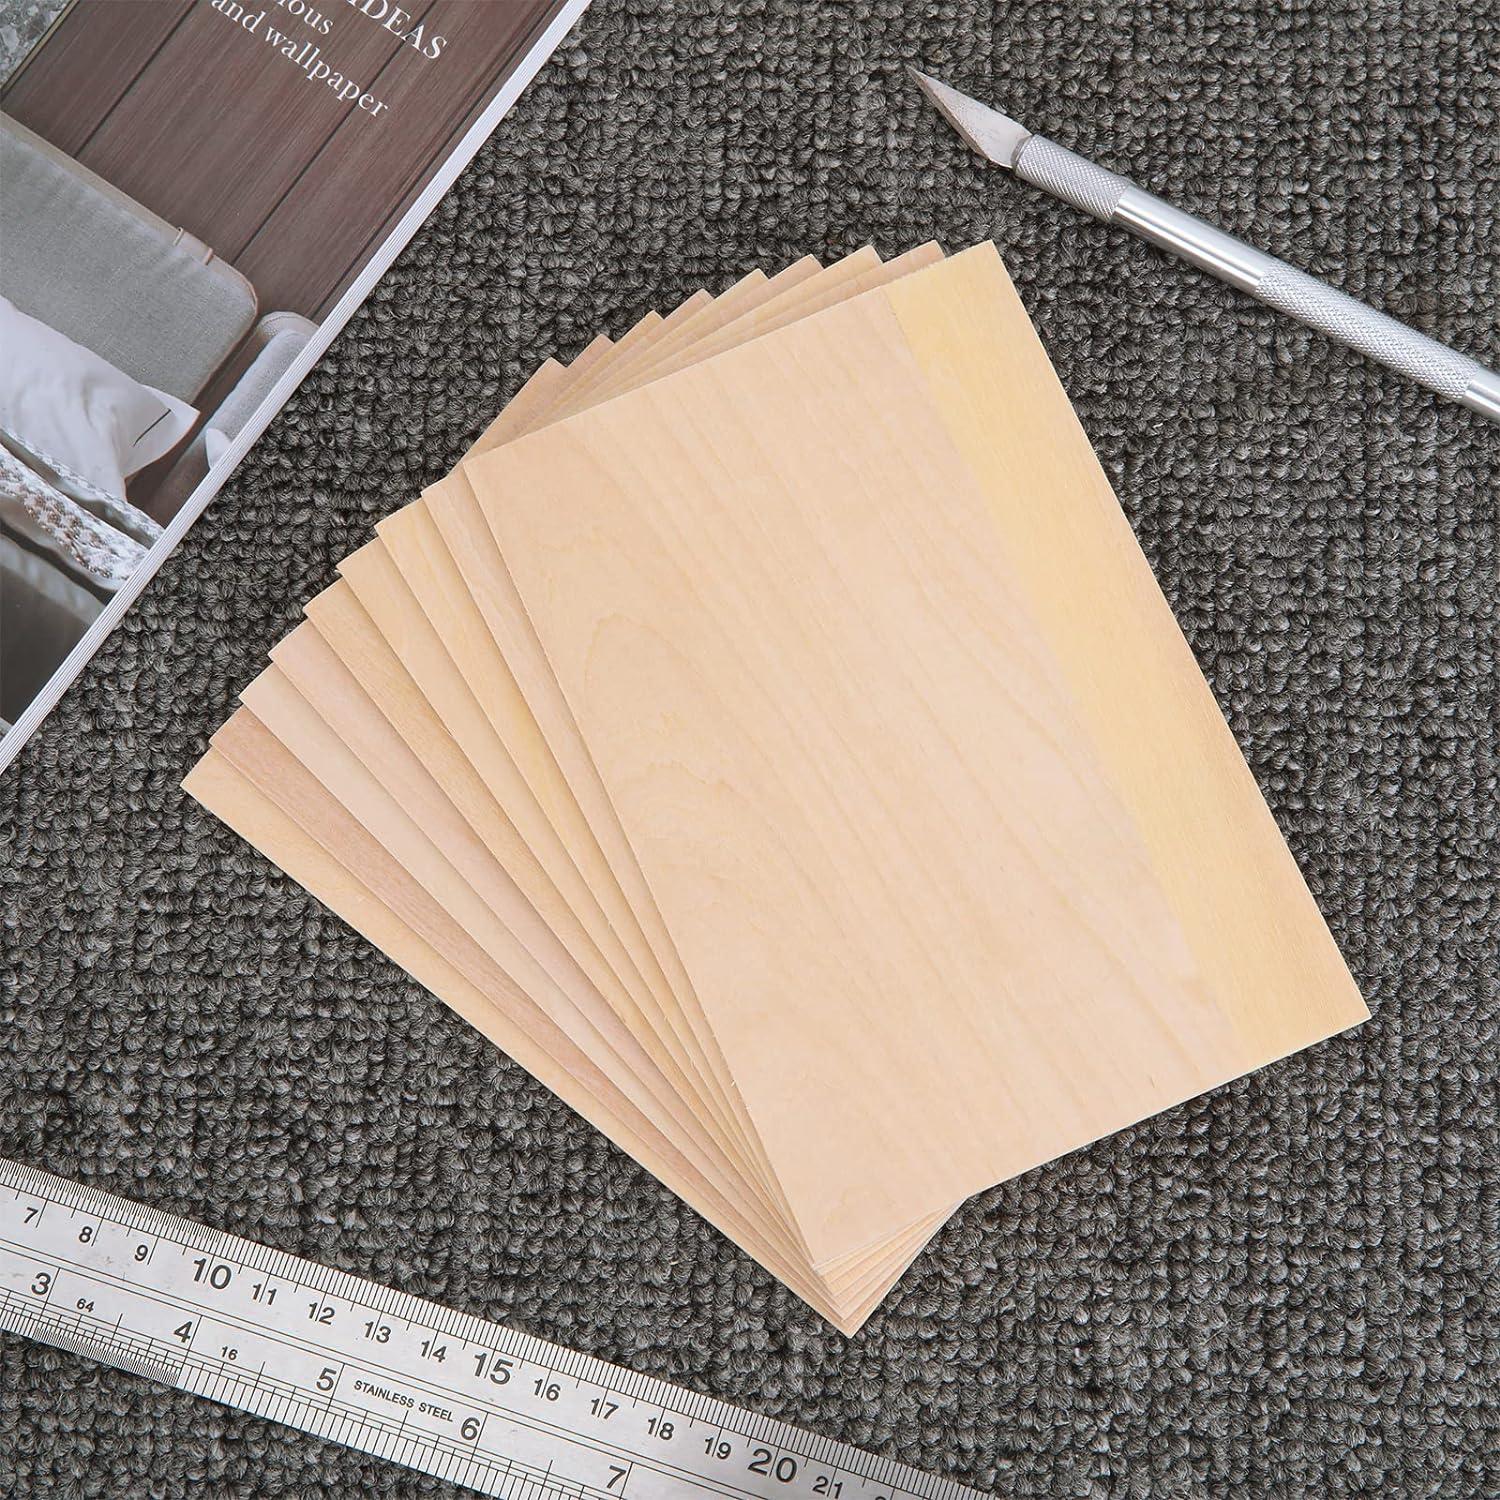 25 Pack 8 x 12 Inch Basswood Sheets 1/16 Thin Craft Plywood Sheets